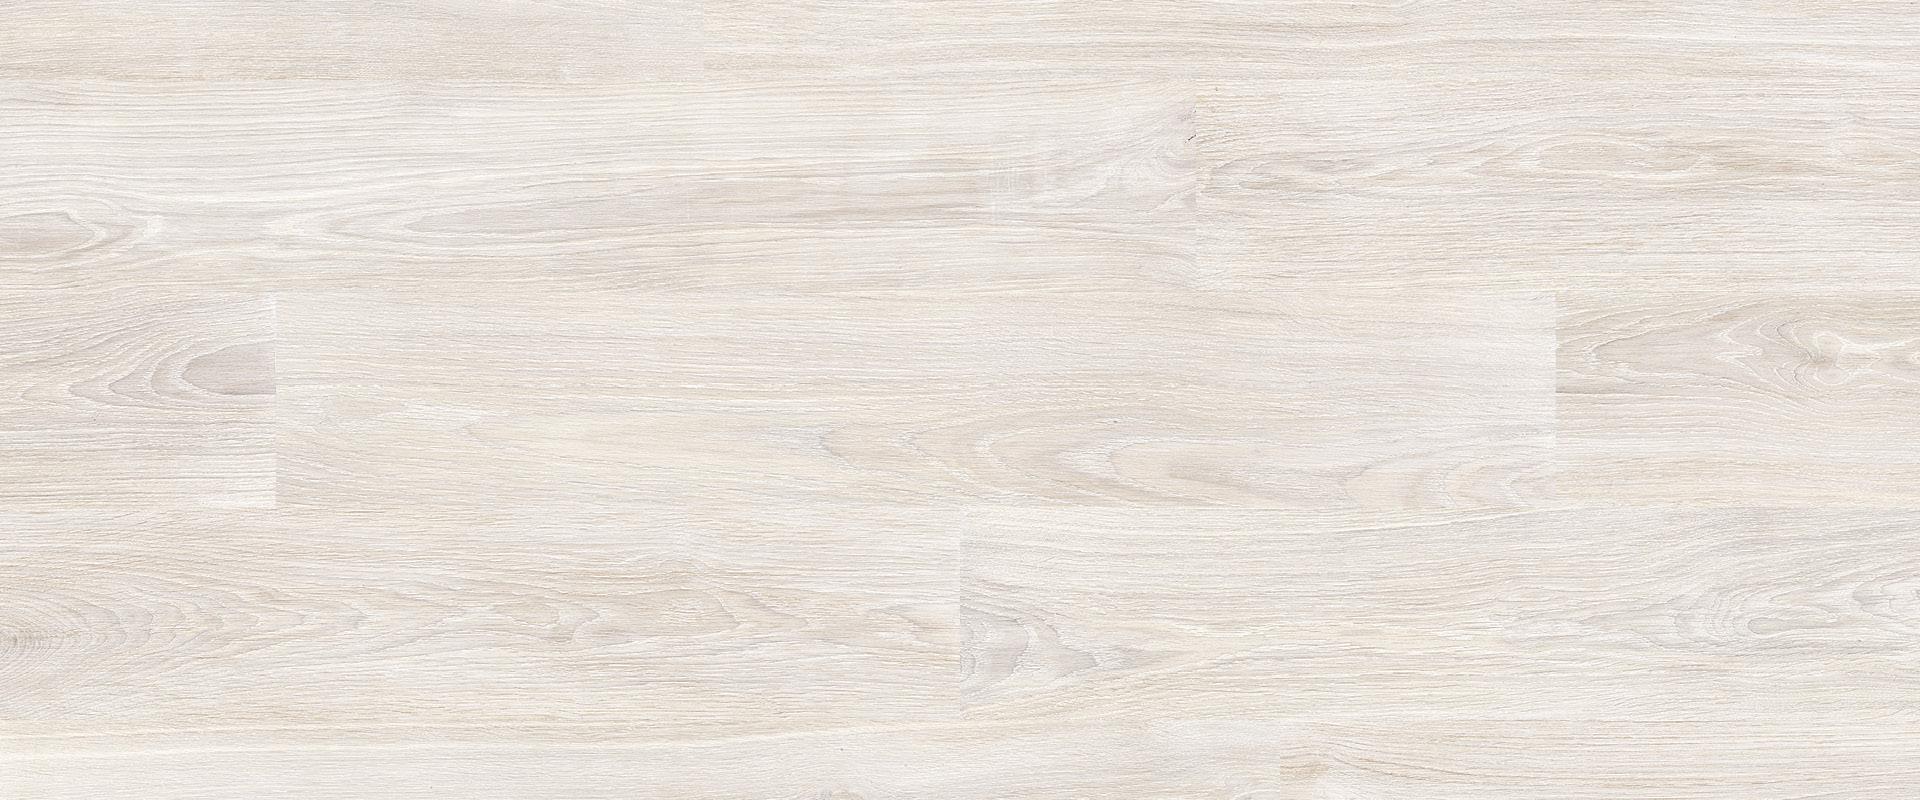 Woodtouch: Wood Sbiancato Field Tile (8"x48"x9.5-mm | soft)